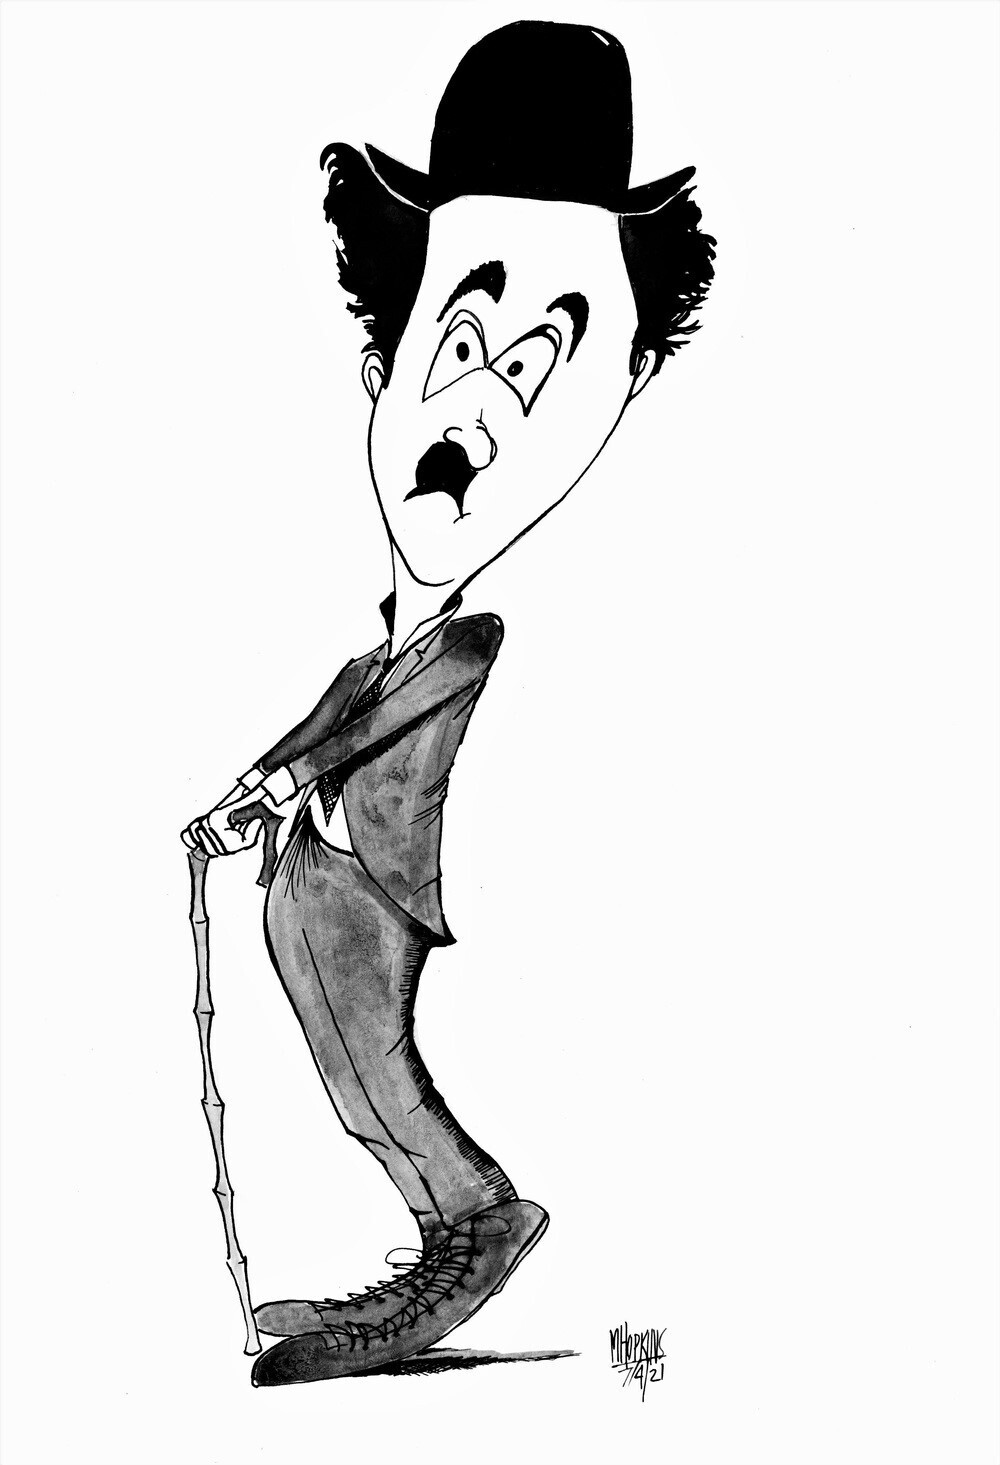 Chaplin - Limited Edition Giclée Prints from $50.00 to $100.00